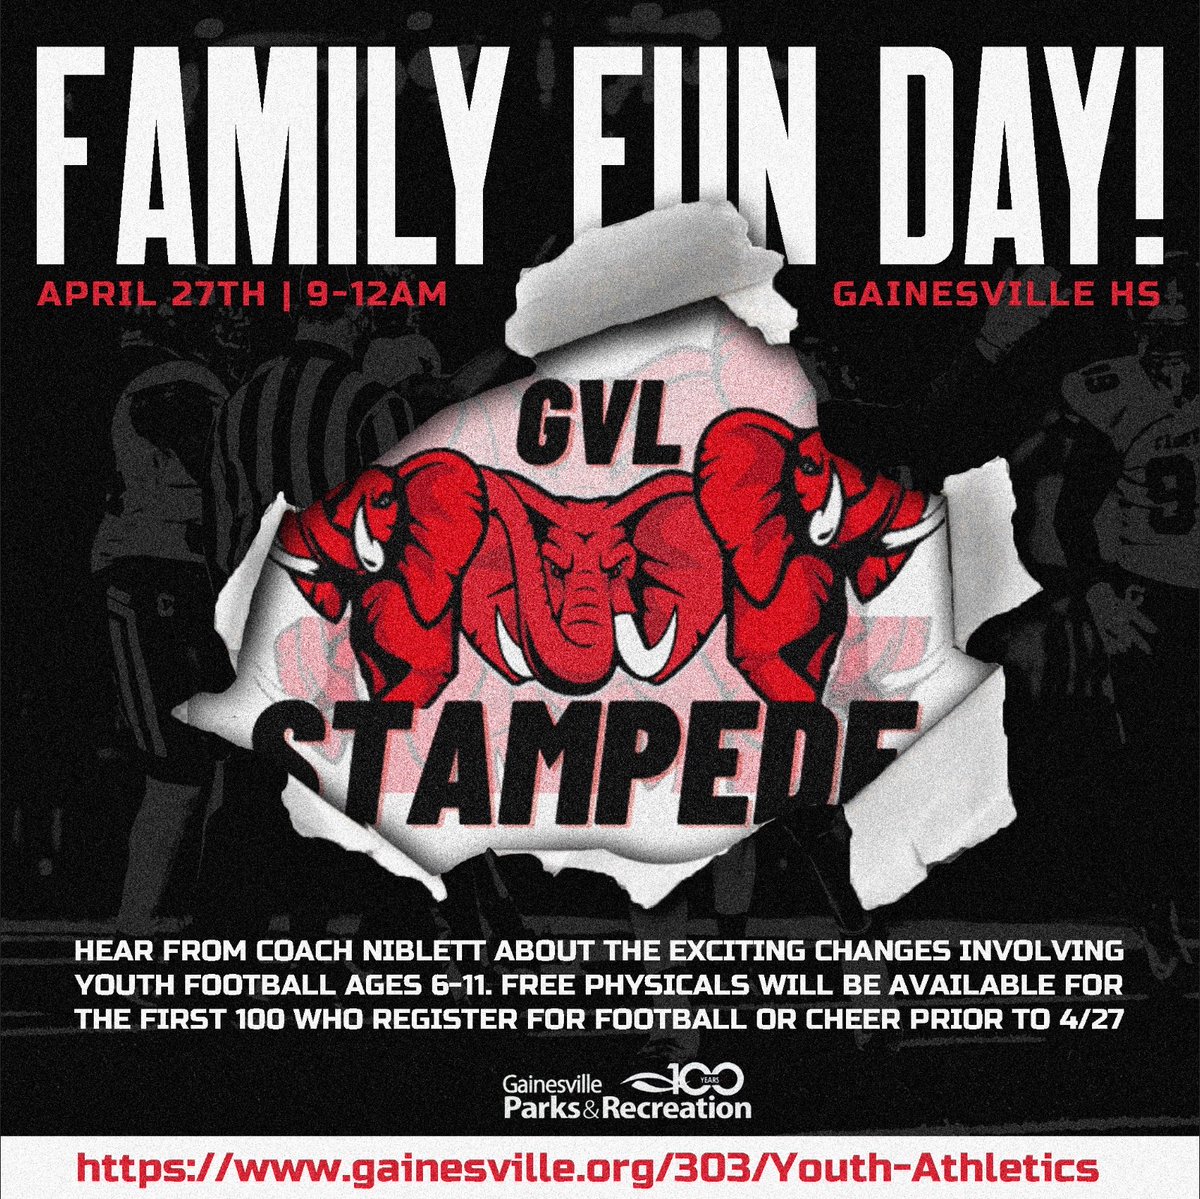 Don’t forgot Saturday. See you there! GVL Stampede FUNdamentals-Fast-Finish